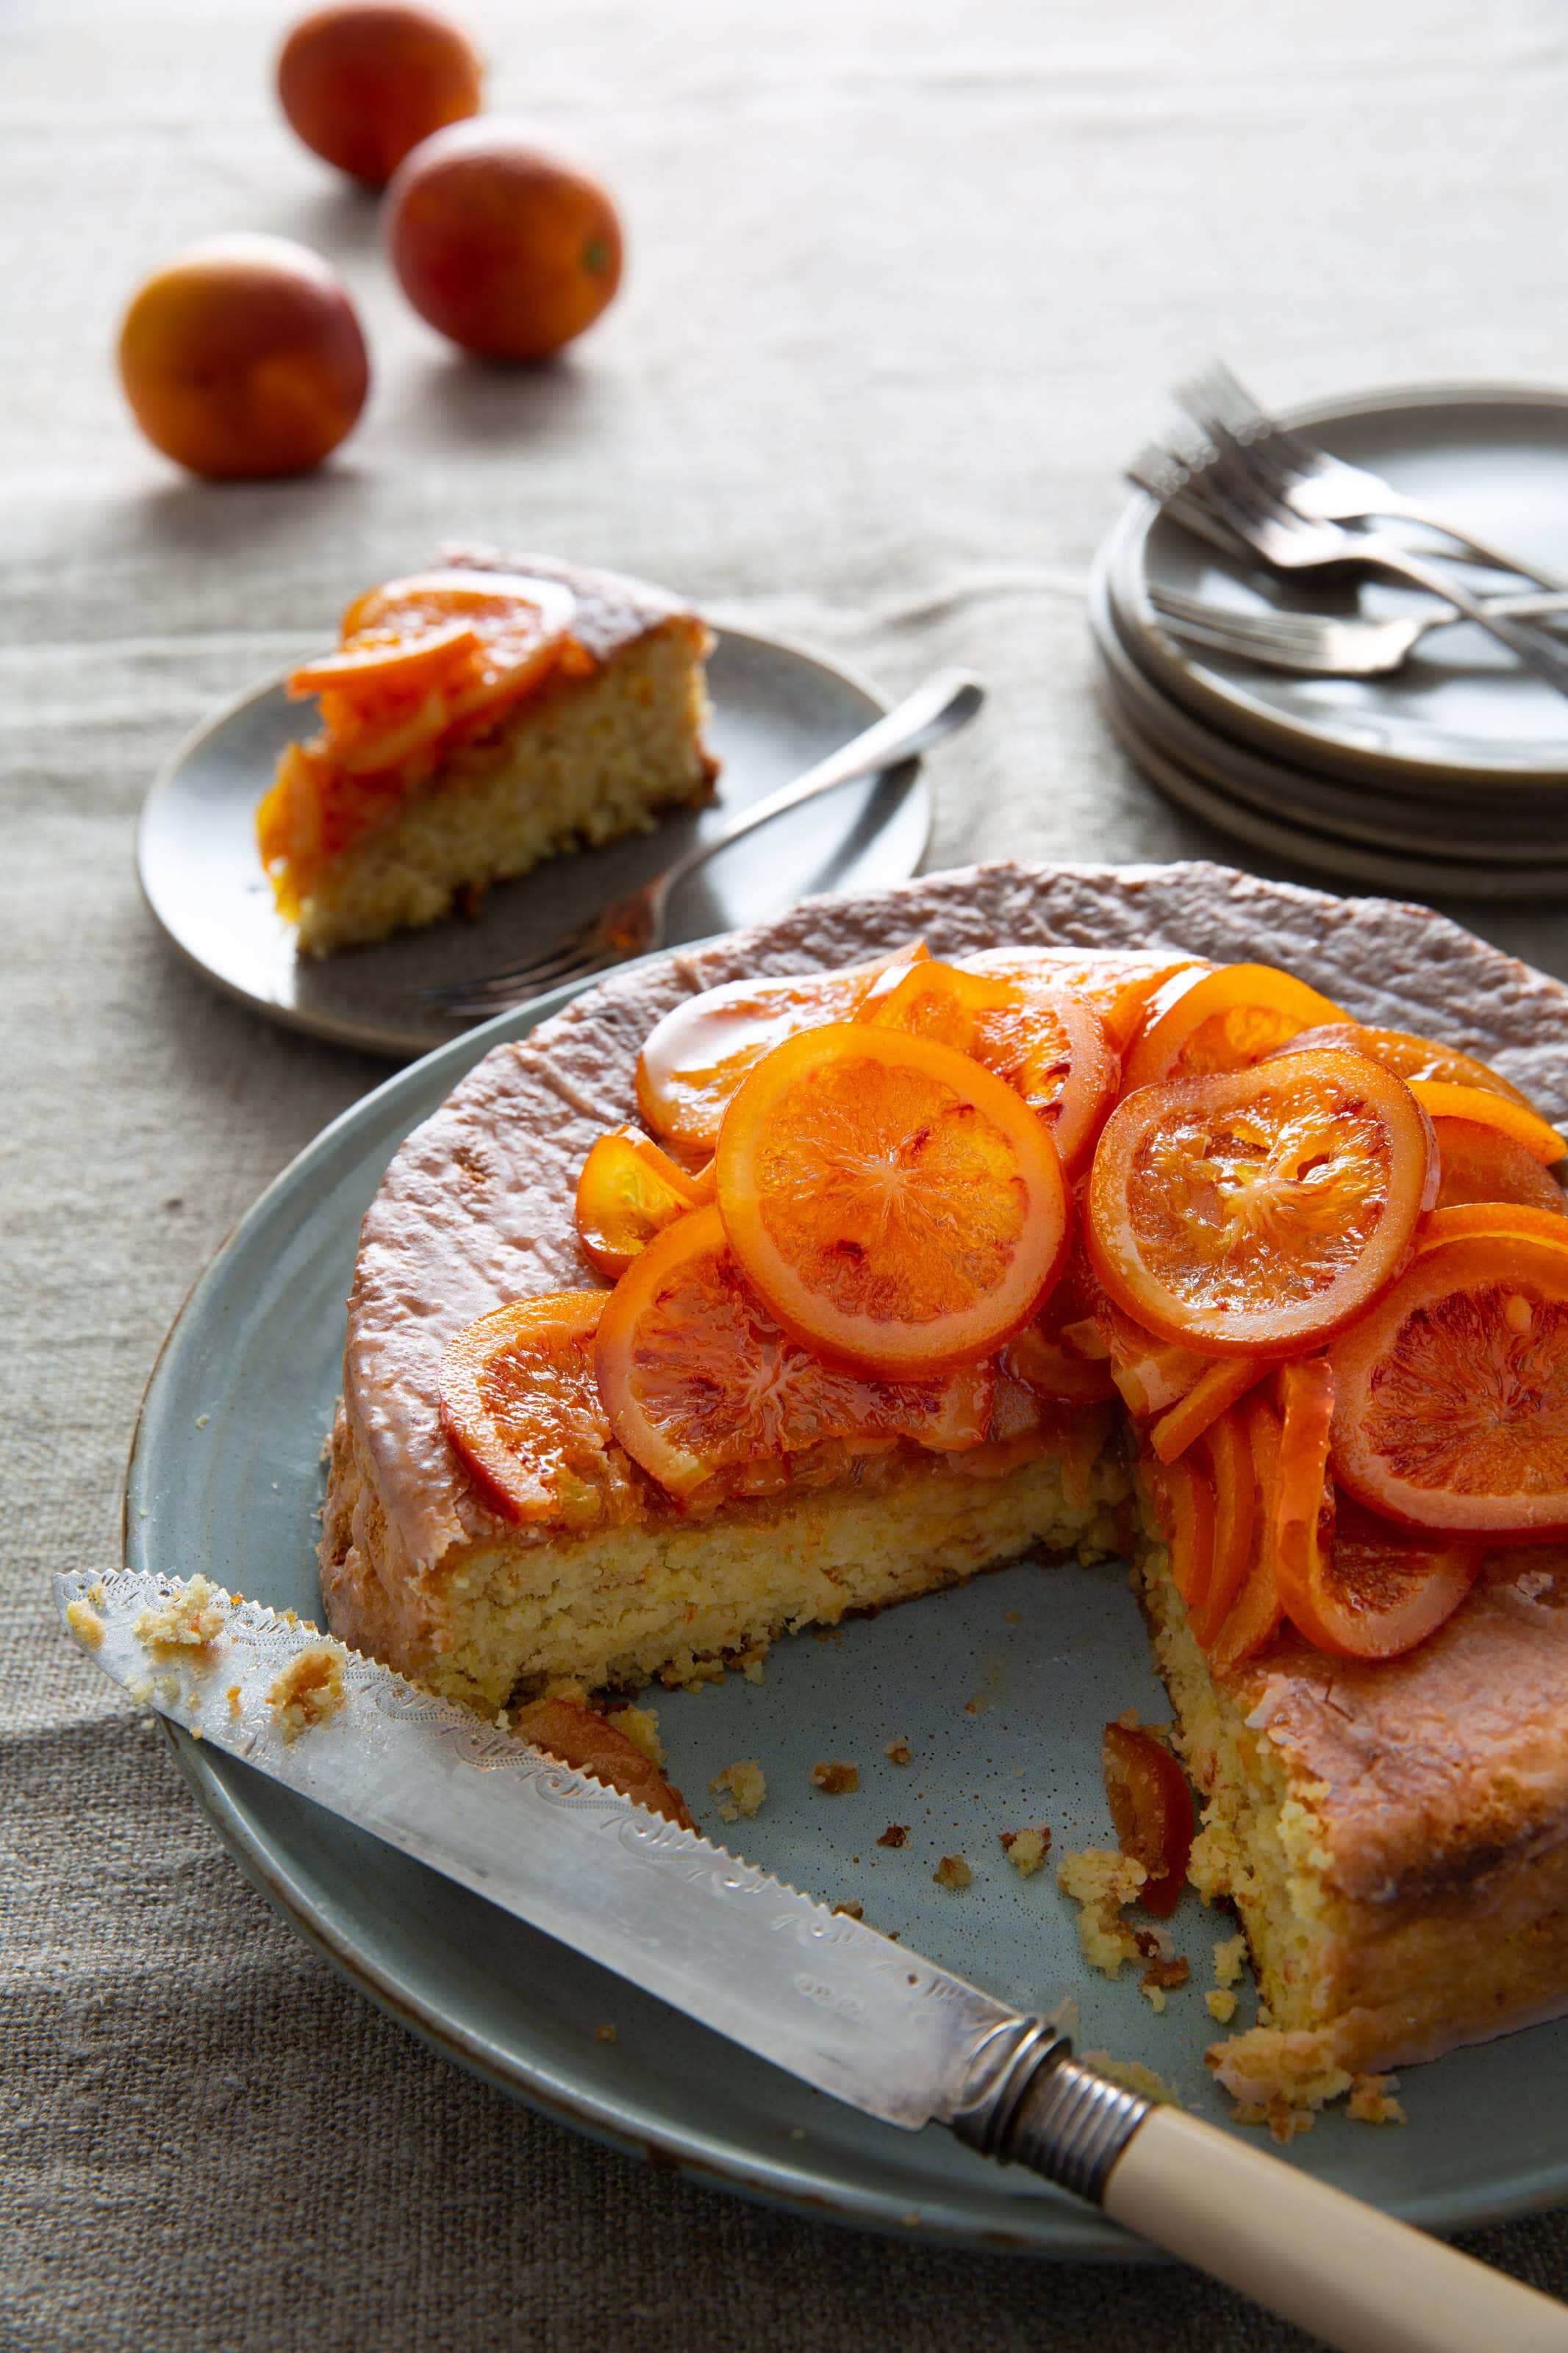 almond and blood orange cake with candies blood oranges on top.